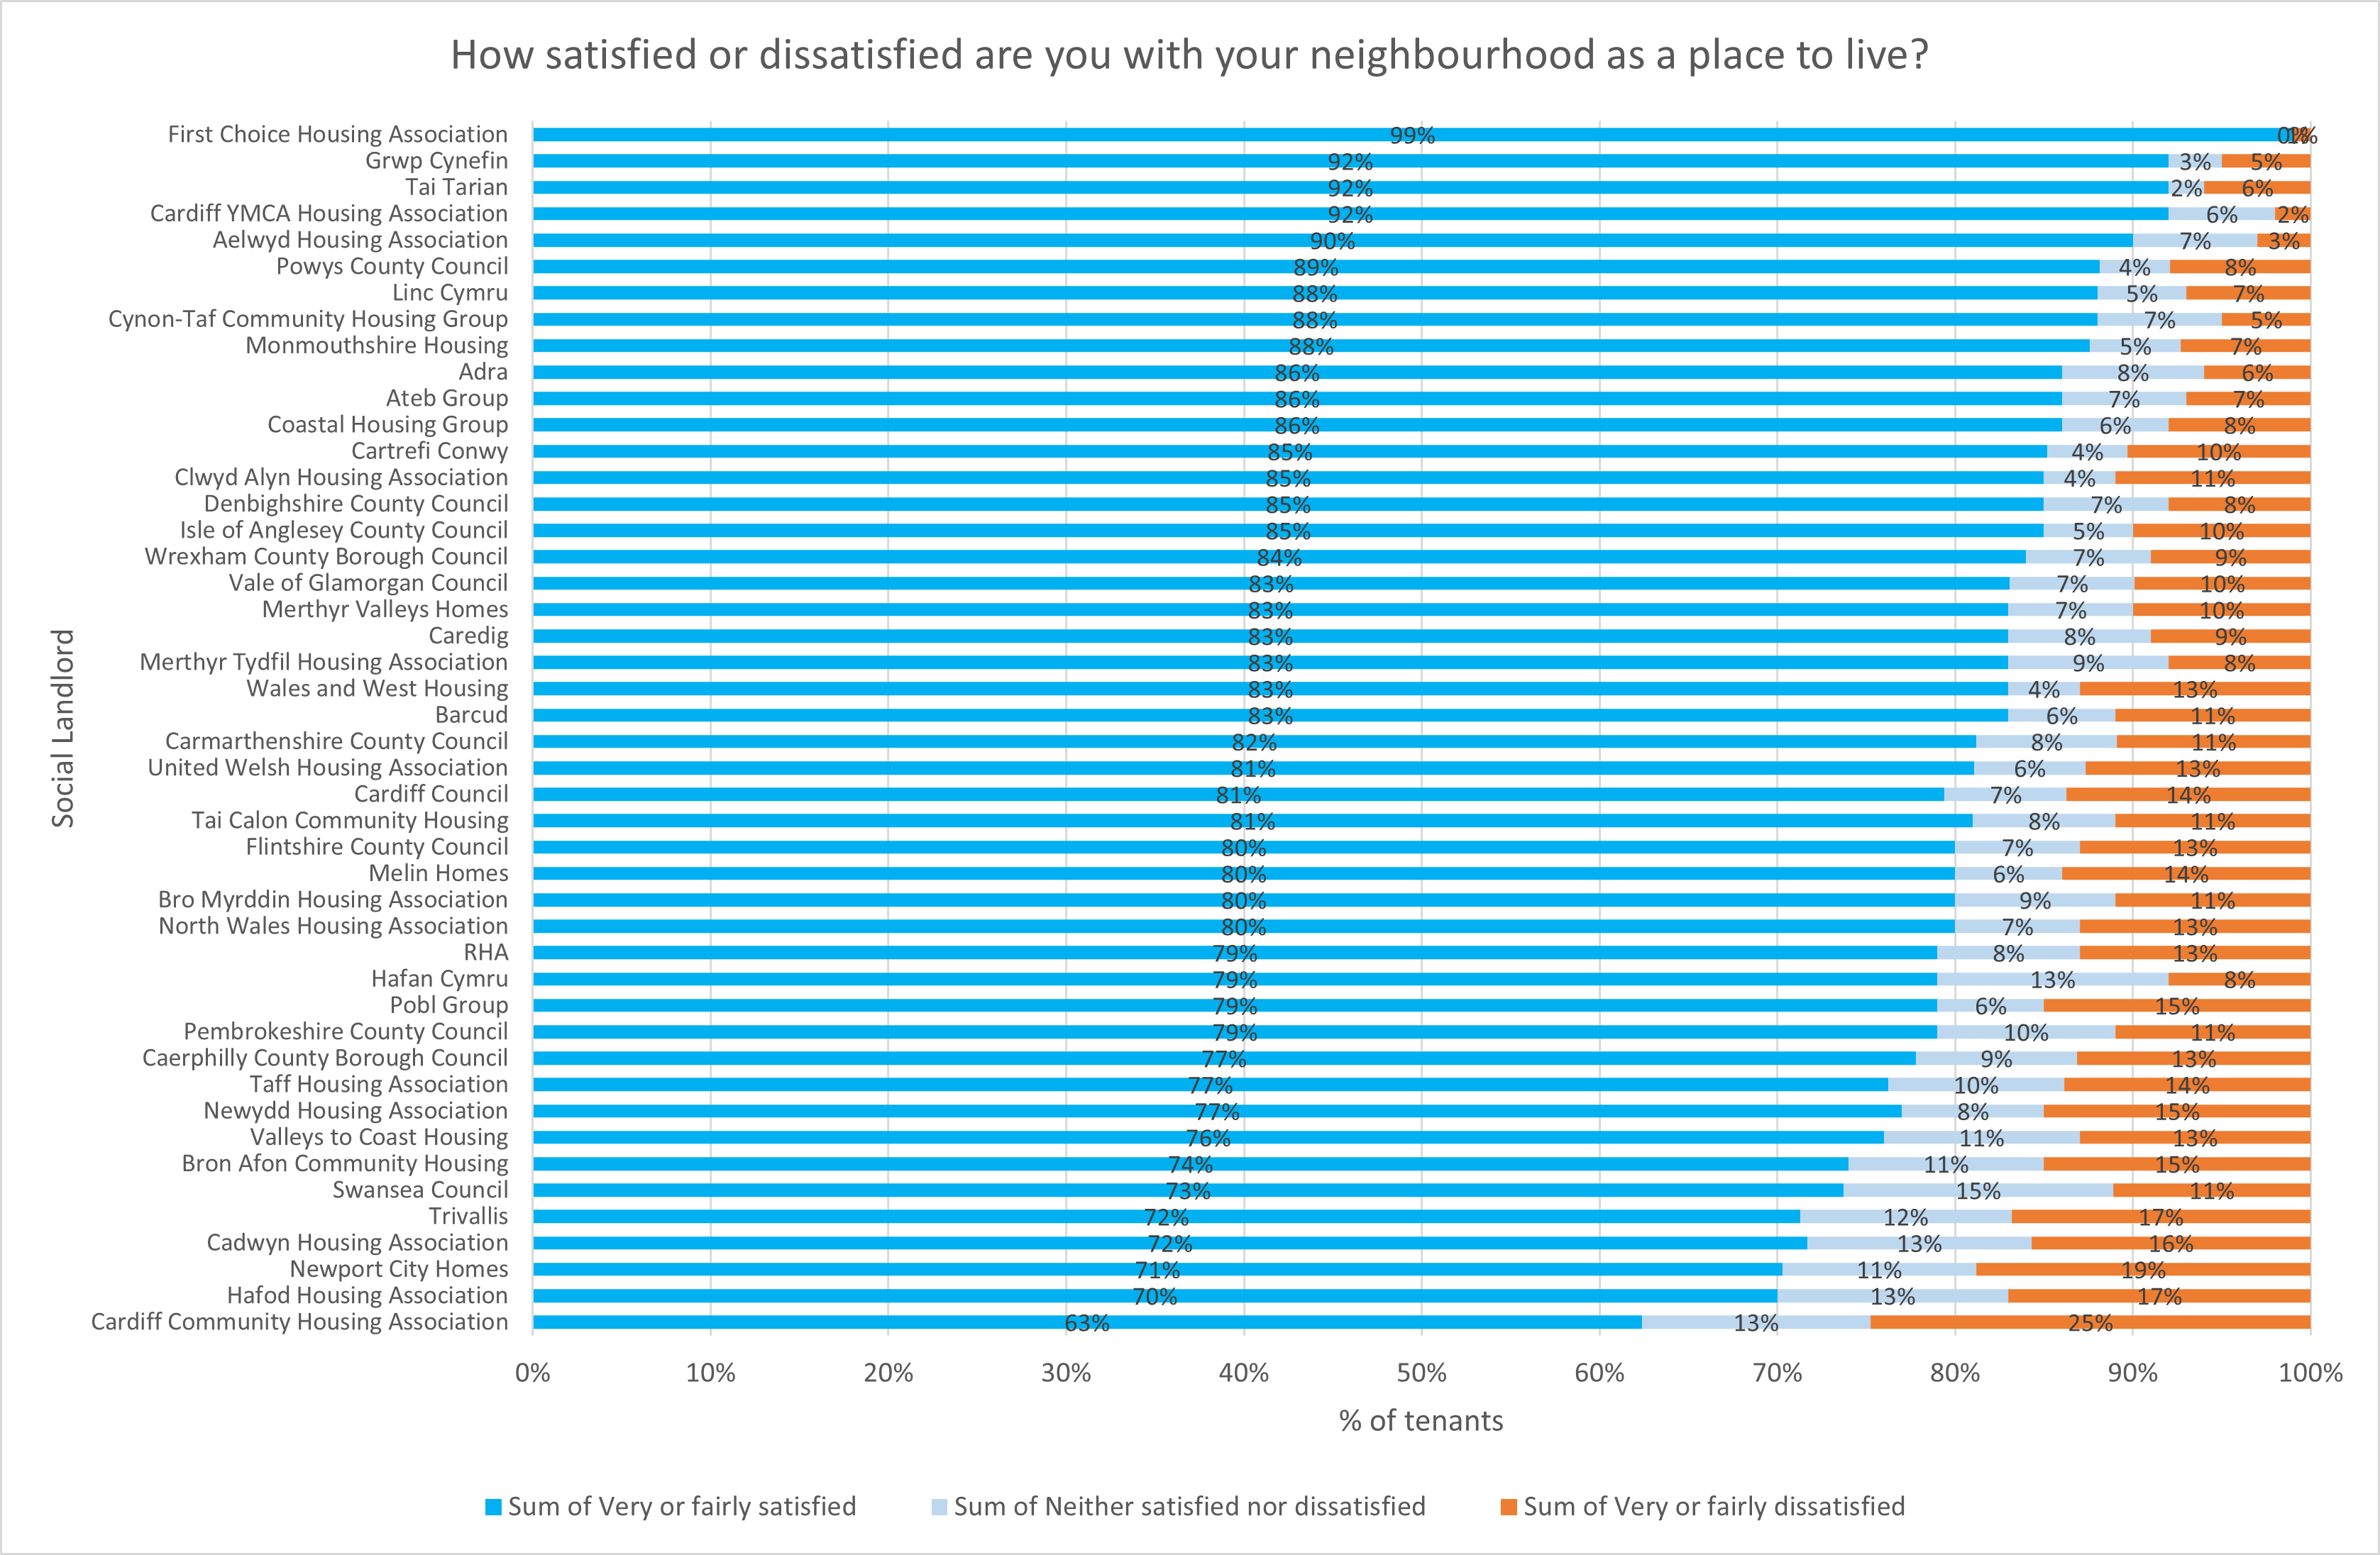 How satisfied or dissatisfied are you with your neighbourhood as a place to live?